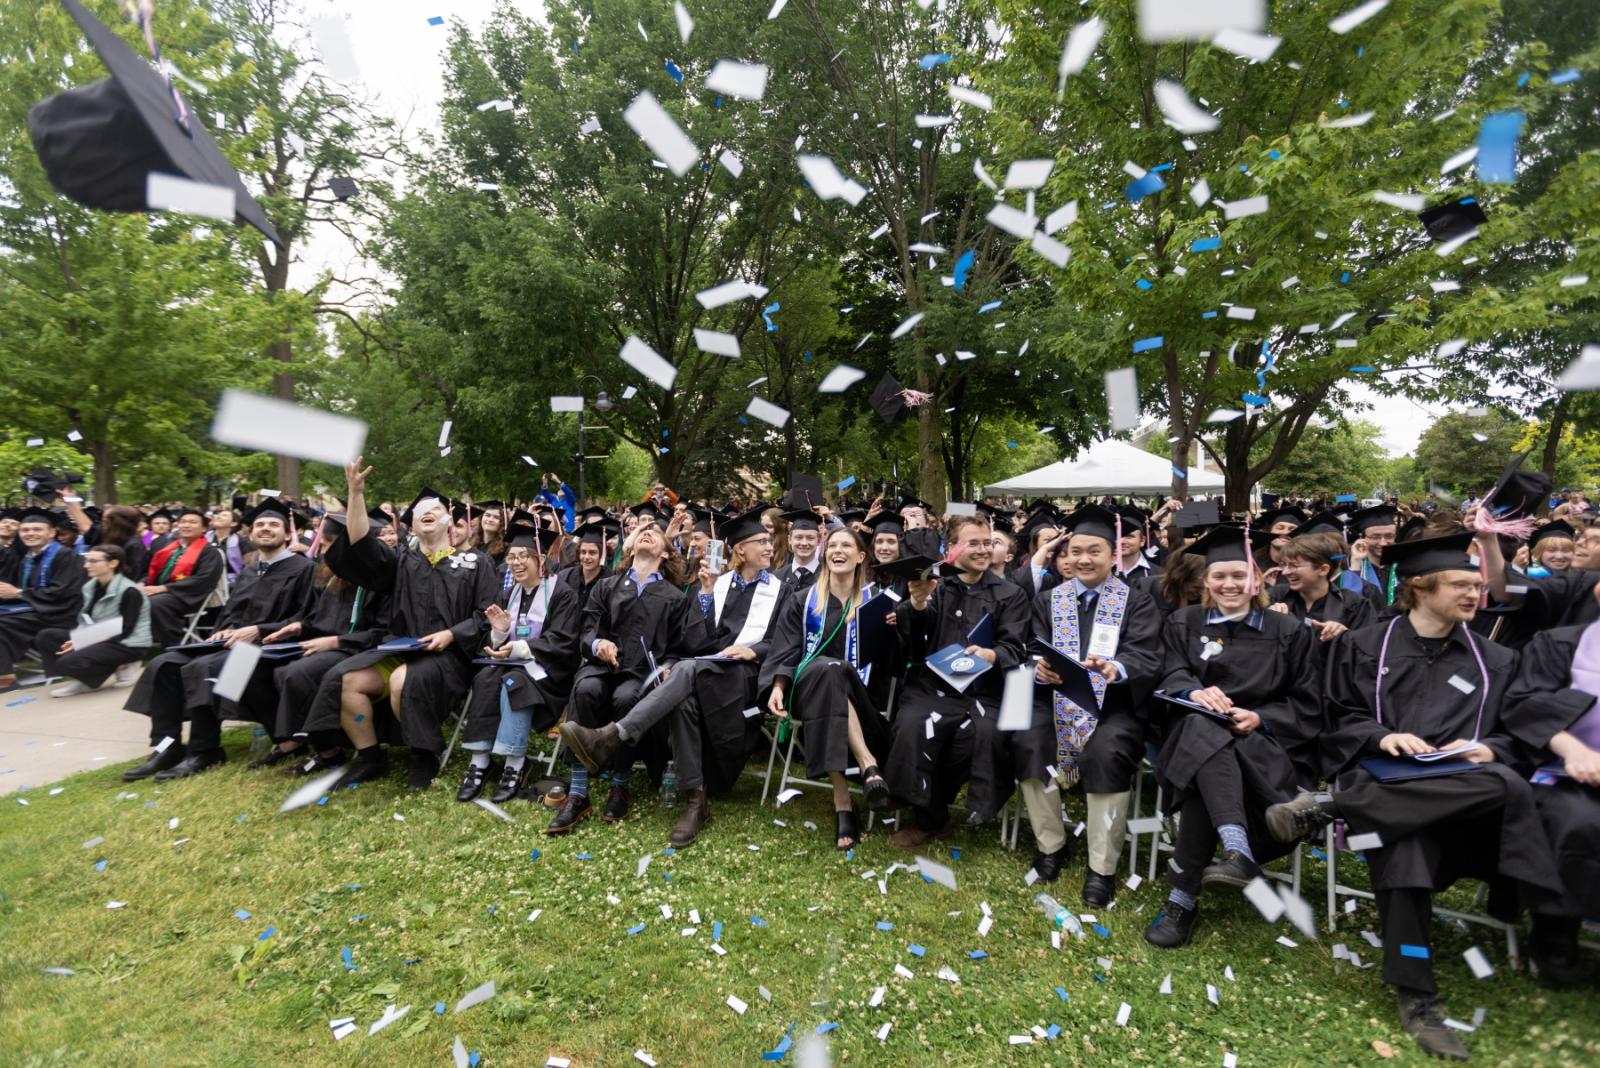 Confetti and hats fly among the graduates at close of Commencement.